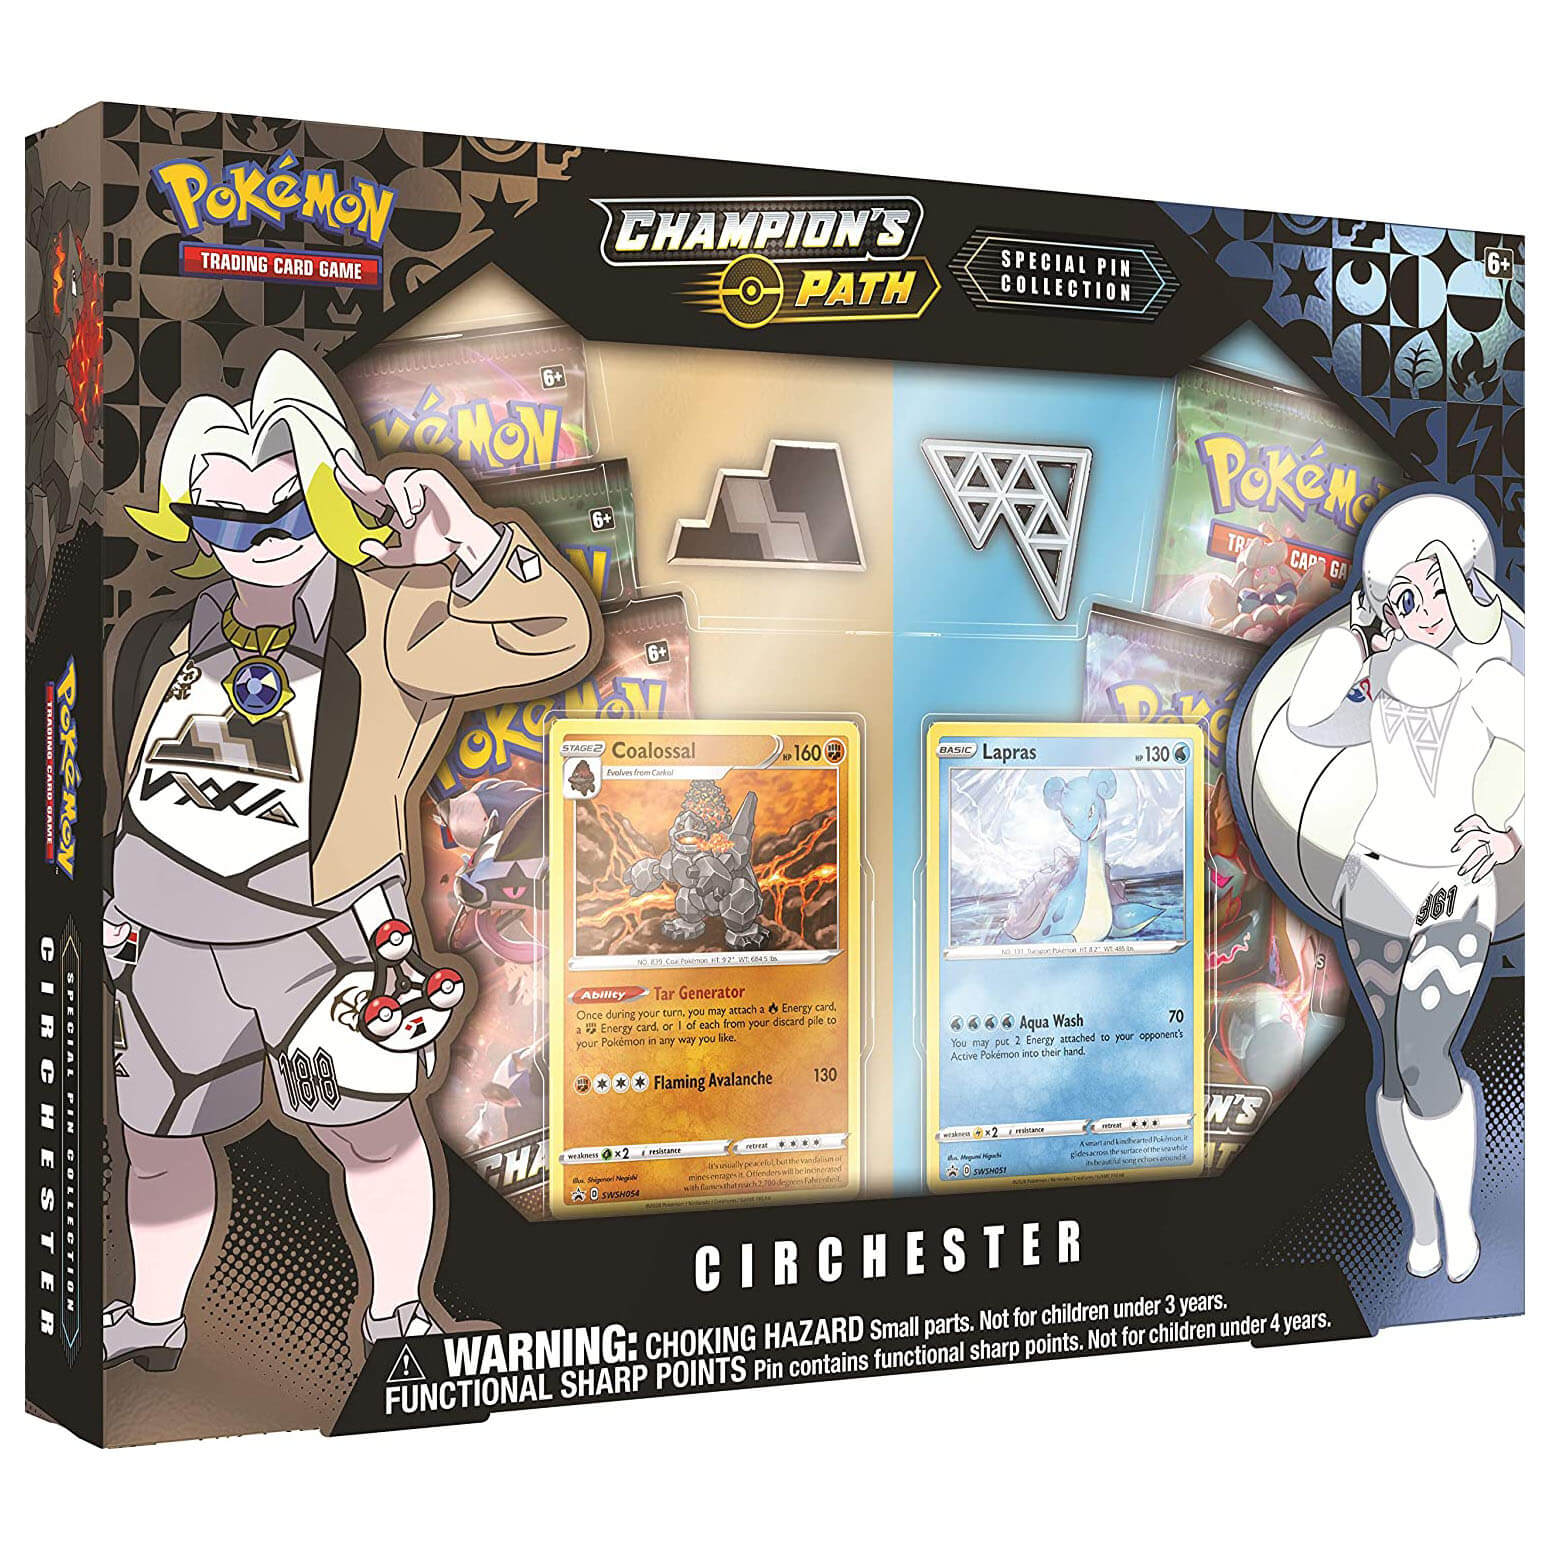 Pokemon TCG Champion's Path Circhester Special Pin Collection